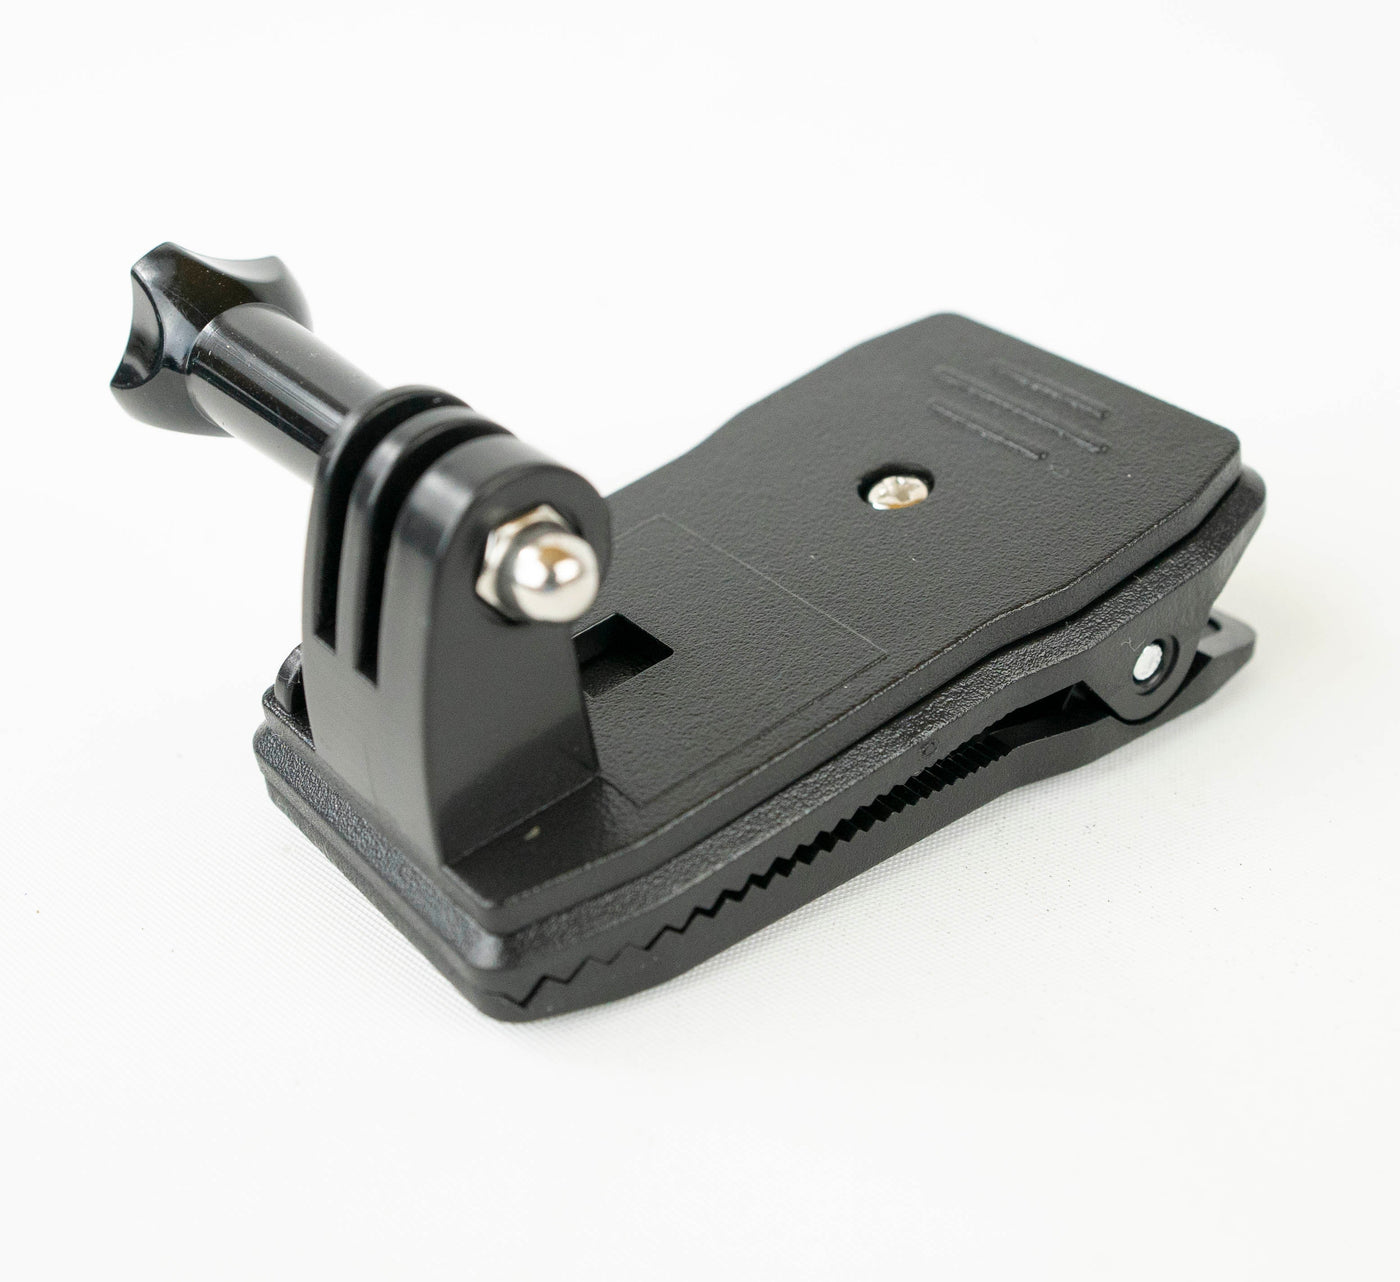 Attachment Kit - Basic - Small Cams - UK